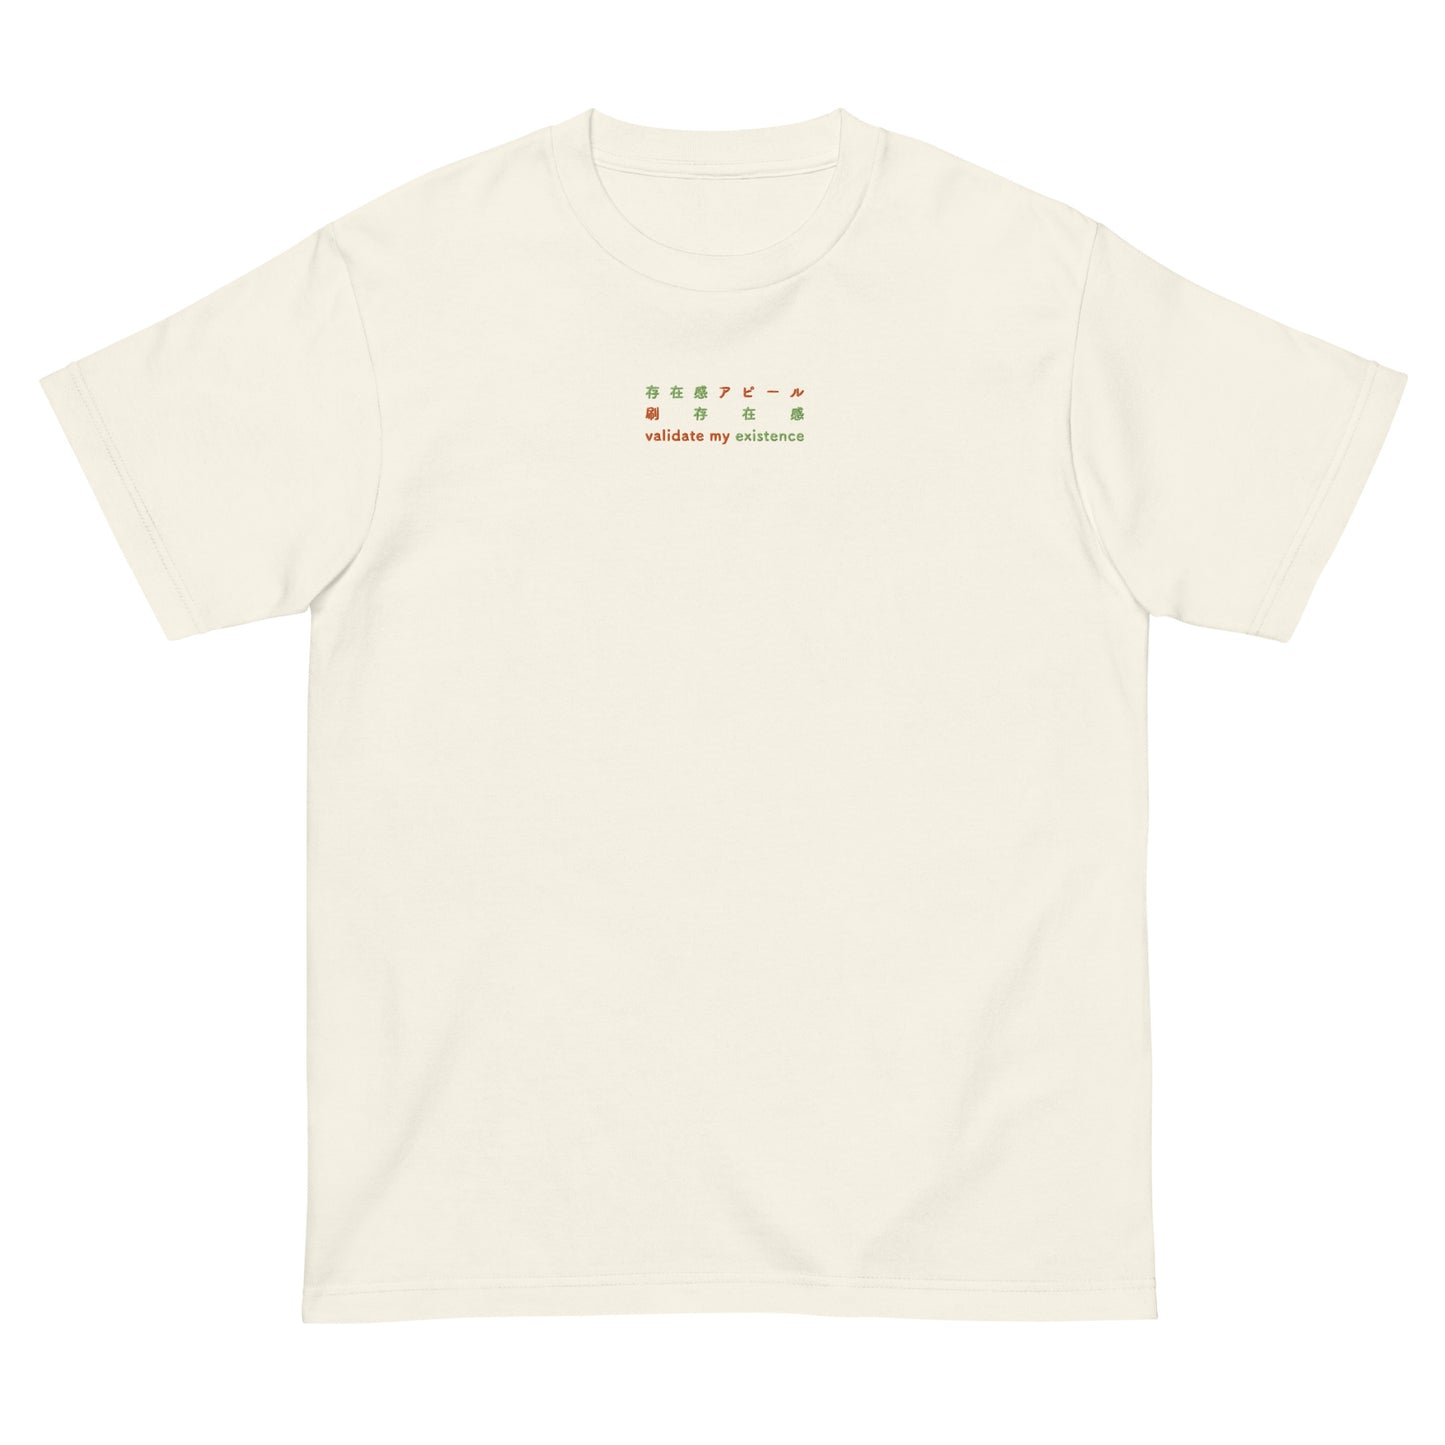 Ivory High Quality Tee - Front Design with an Orange,Green Embroidery "Validate my Existence" in Japanese,Chinese and English